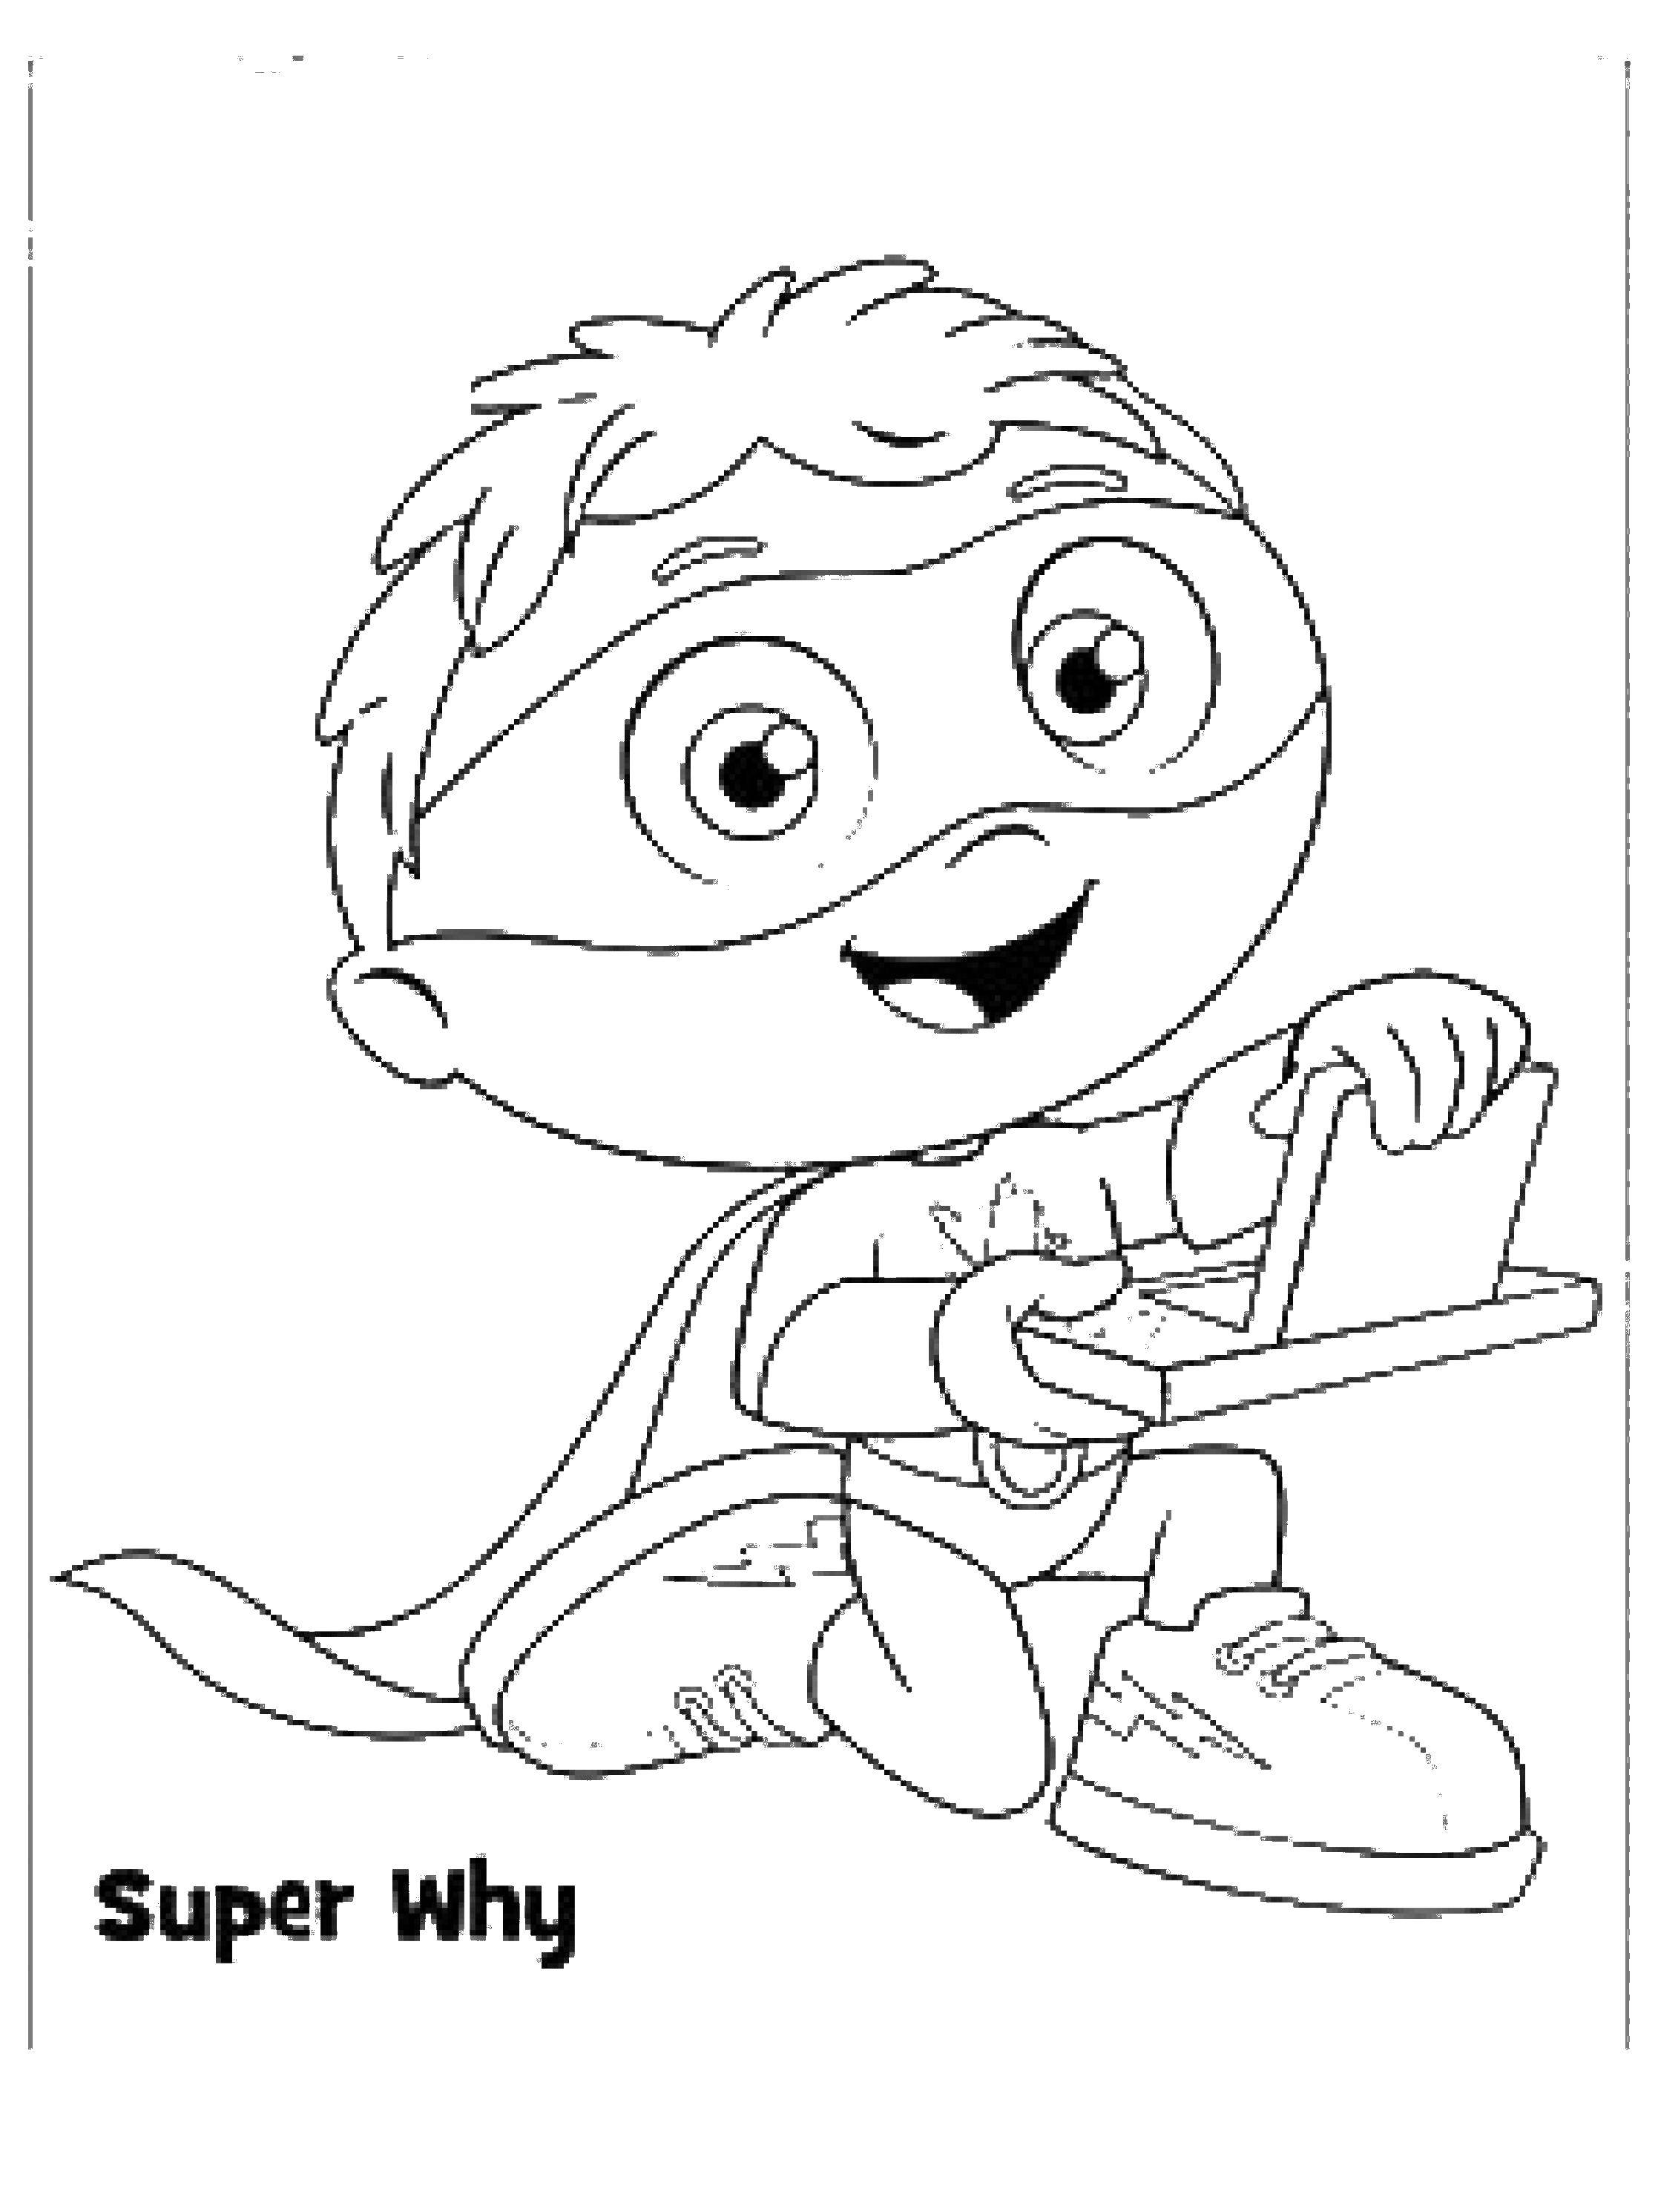 Coloring Super why. Category cartoons. Tags:  Super Why cartoons.